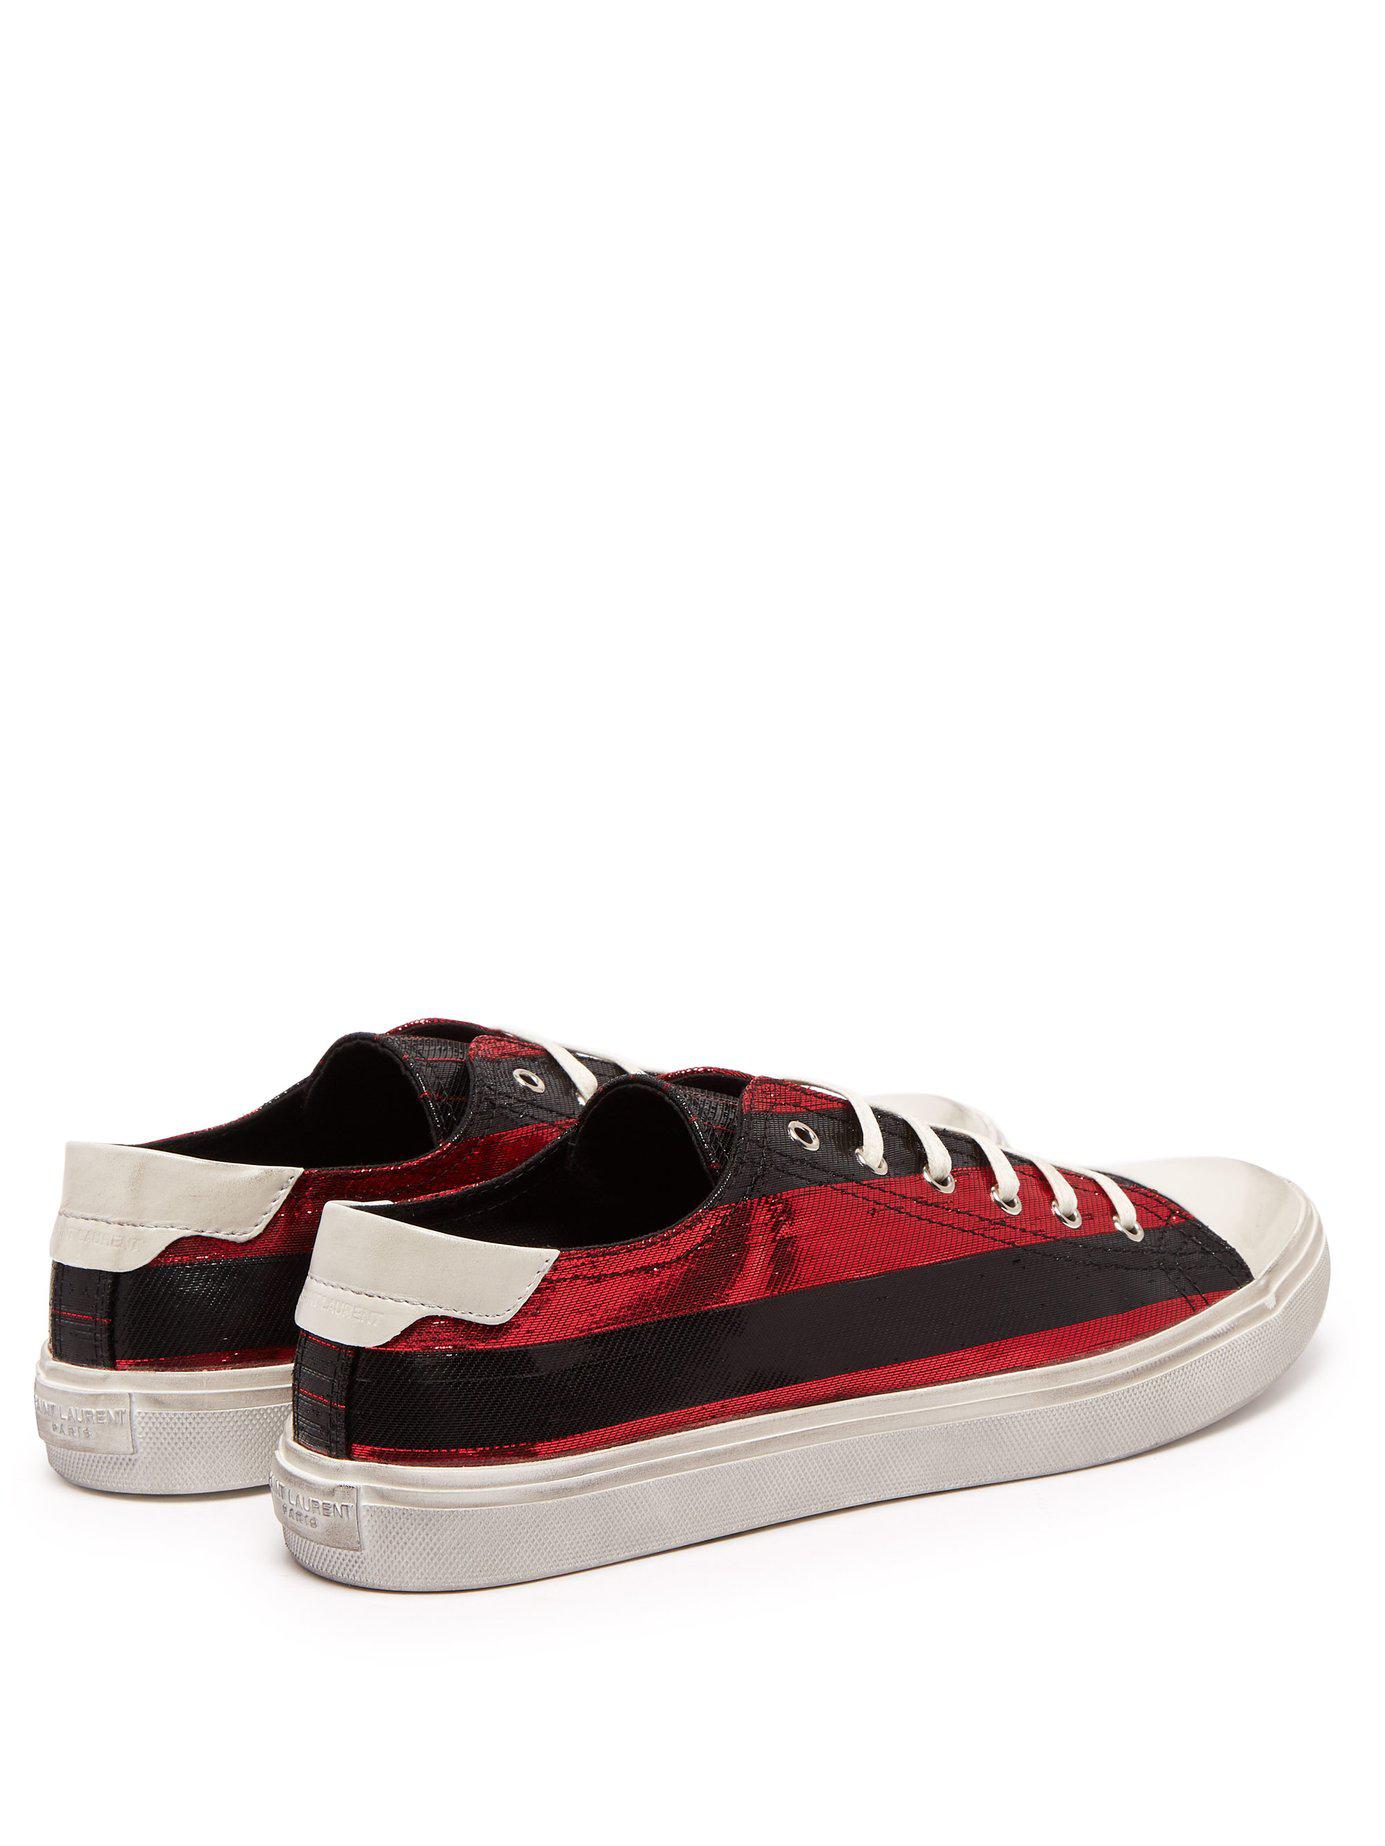 Saint Laurent Bedford Striped Low Top Leather Trainers in Burgundy (Red ...